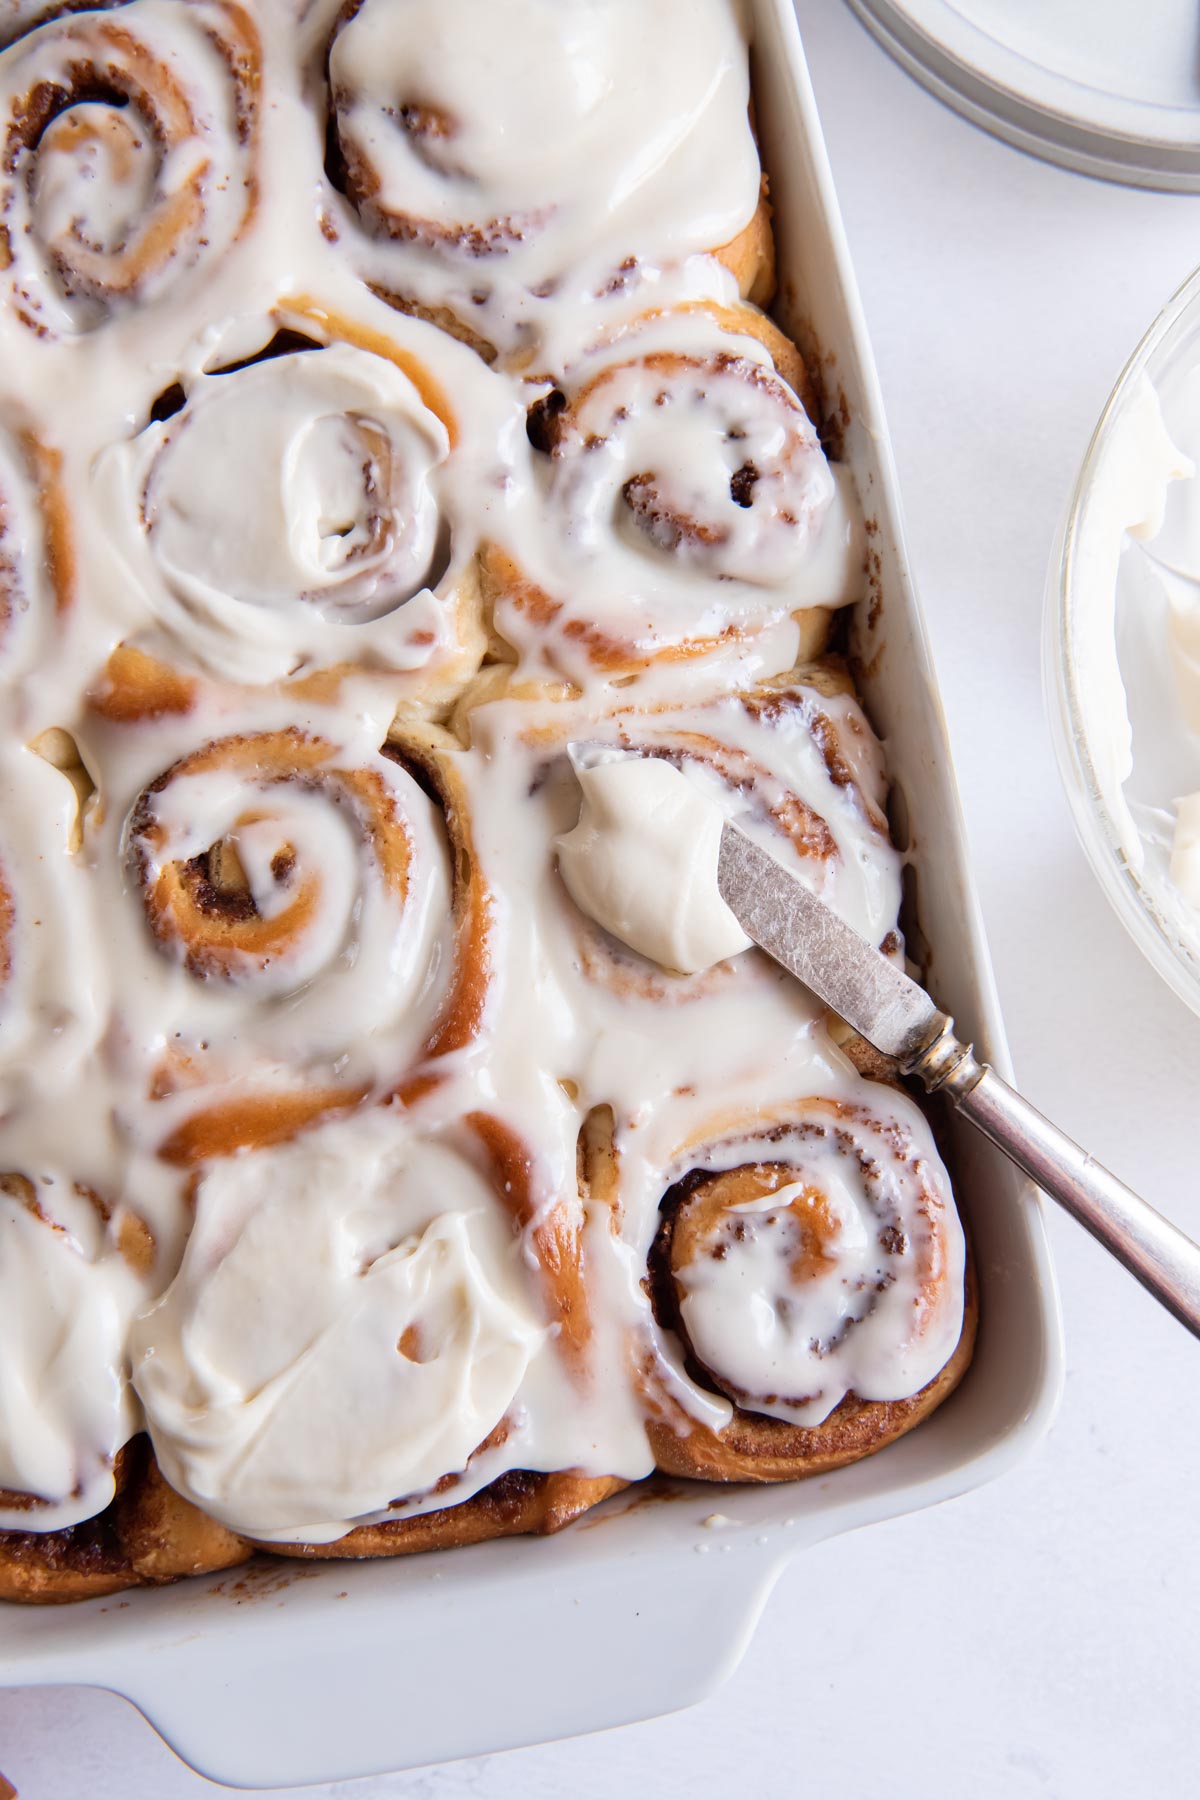 Spreading cream cheese frosting on baked cinnamon rolls.